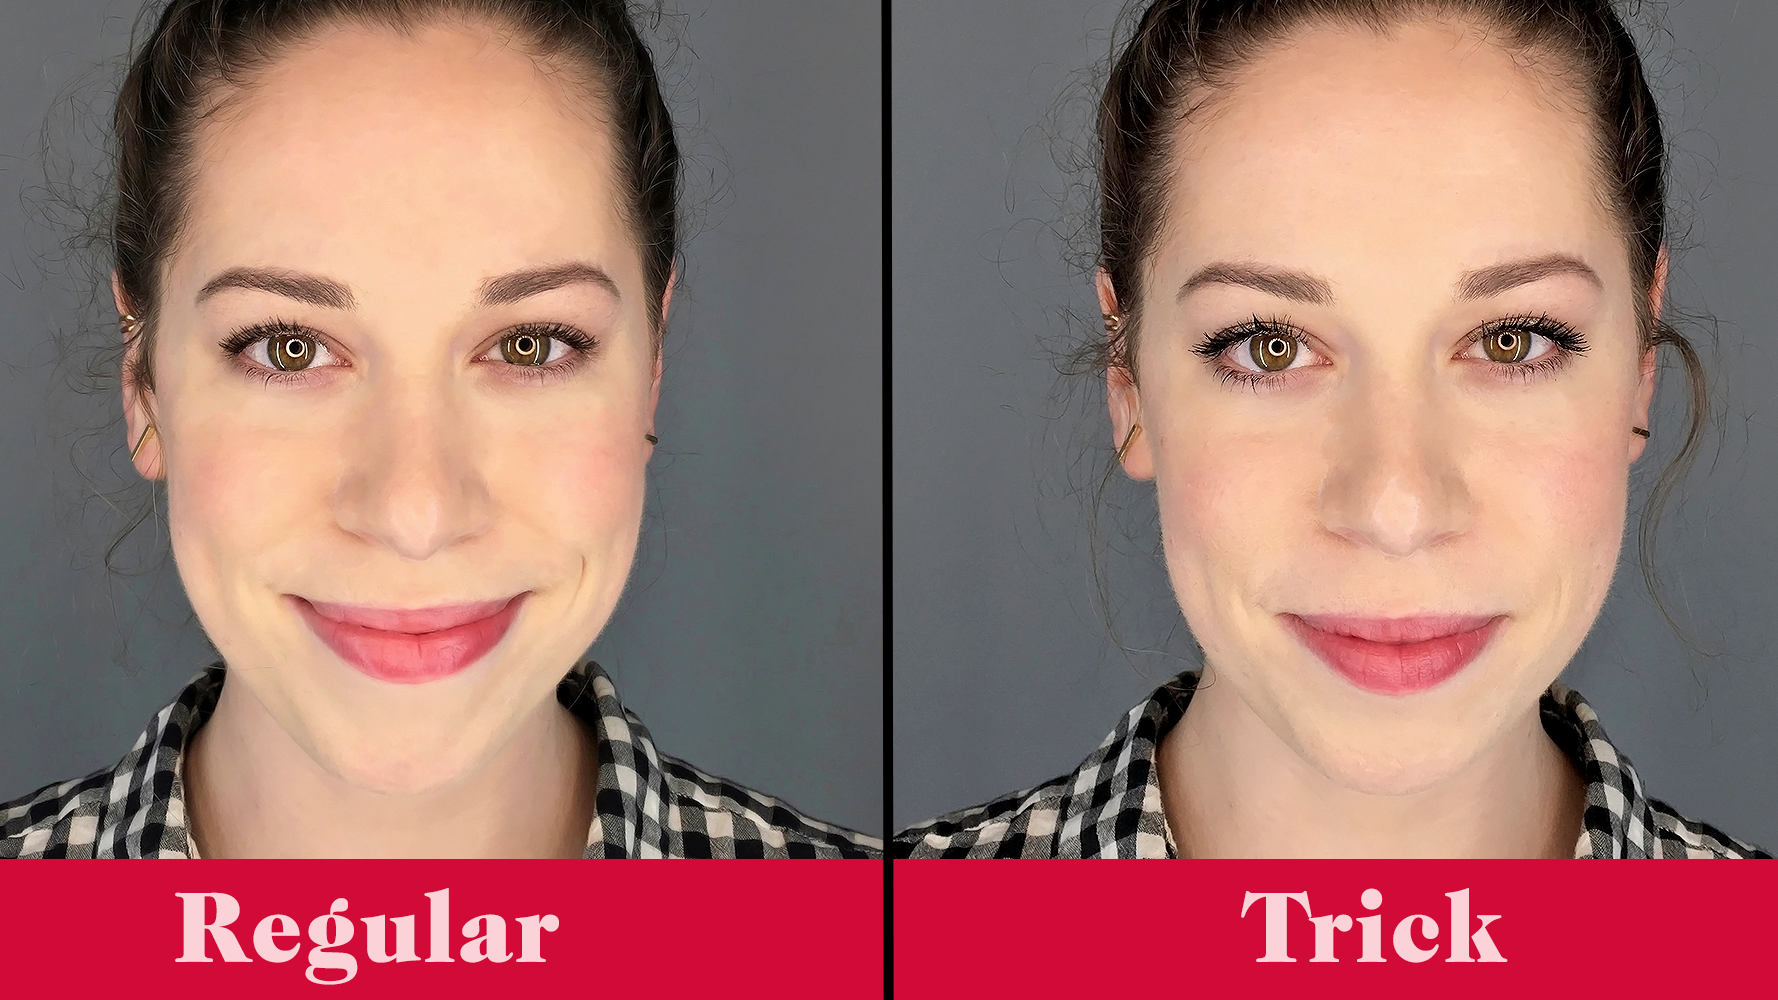 How to Mascara for Thick, Long, Lashes - The One Mascara You Need to Know | Marie